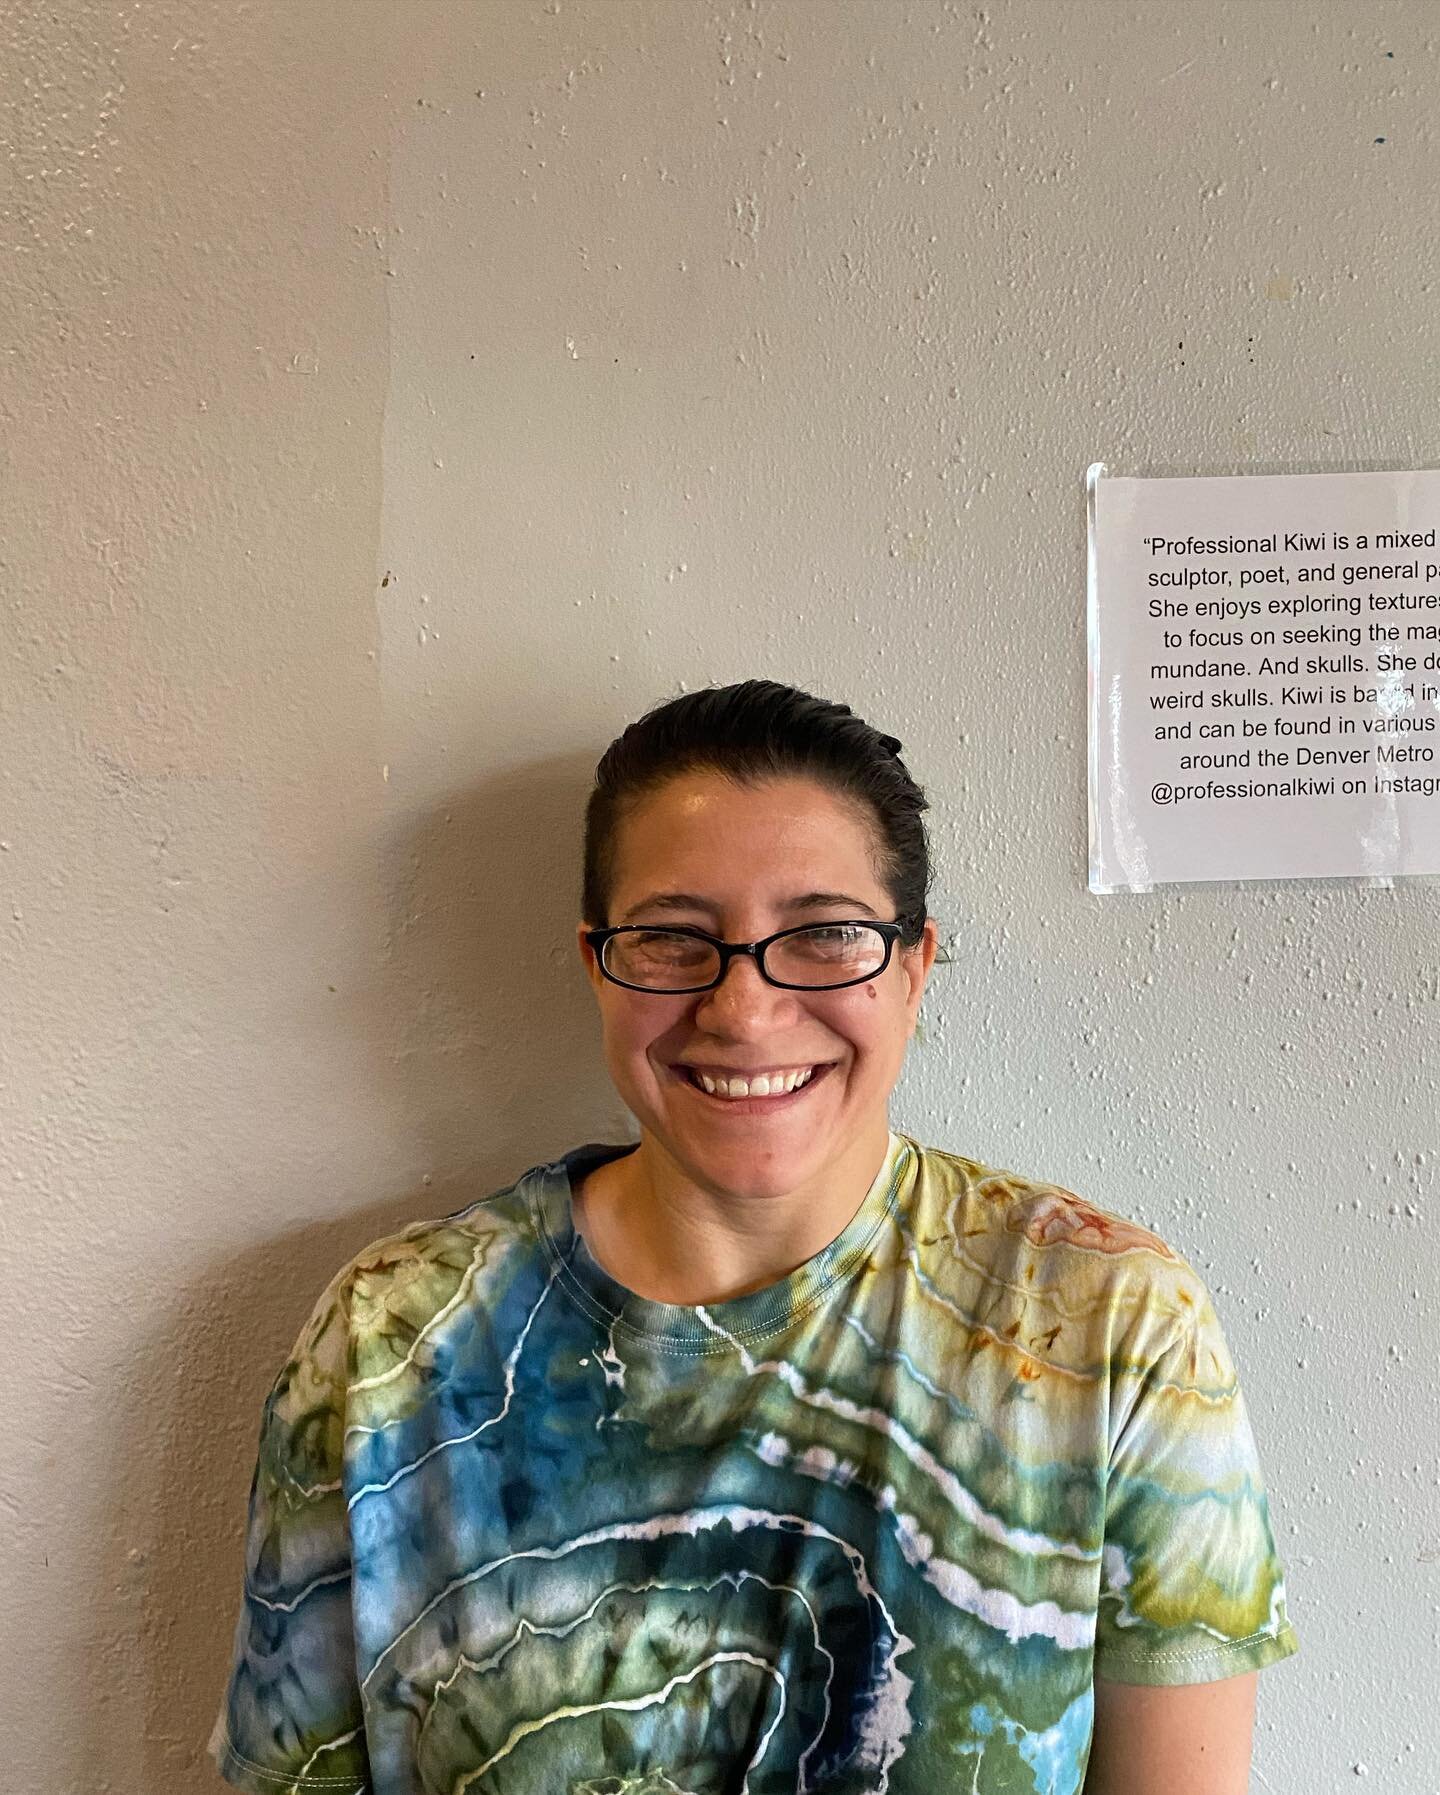 Say hello to our May Artist of the Month - Professional Kiwi! She describes herself as a &ldquo;mixed media artist, sculptor, and poet who enjoys exploring textures, and tends to focus on seeking the magical in the mundane.&rdquo; 

Stop by the cafe 